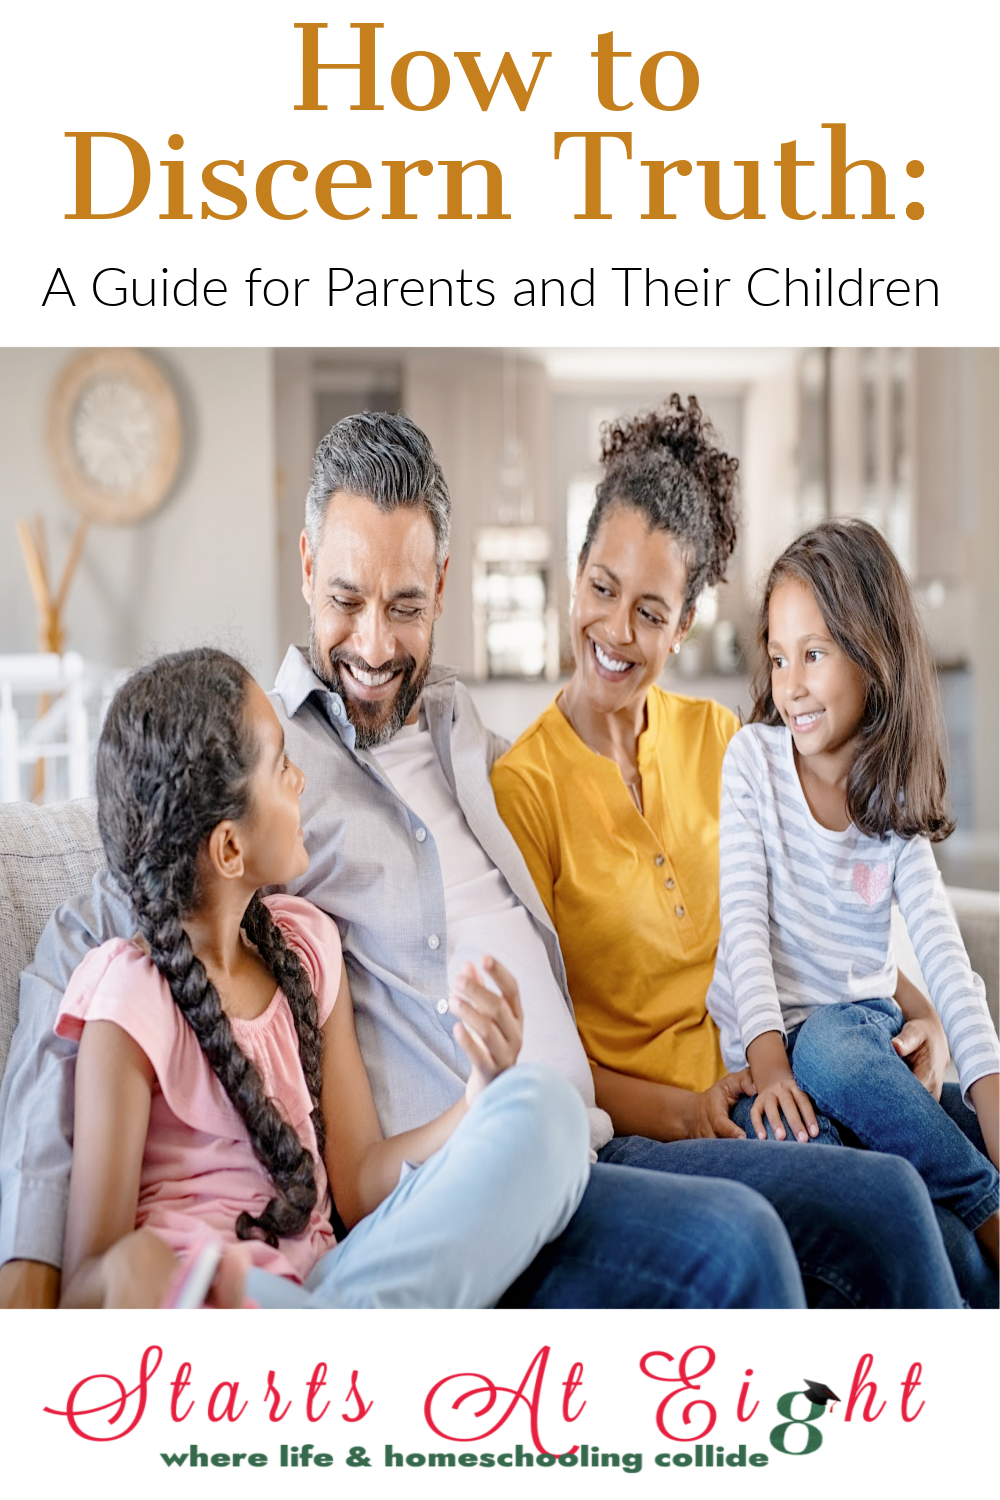 How to Discern Truth: A Guide for Parents & Their Children on Truth, objective vs. subjective truth, and how to apply this knowledge in life.